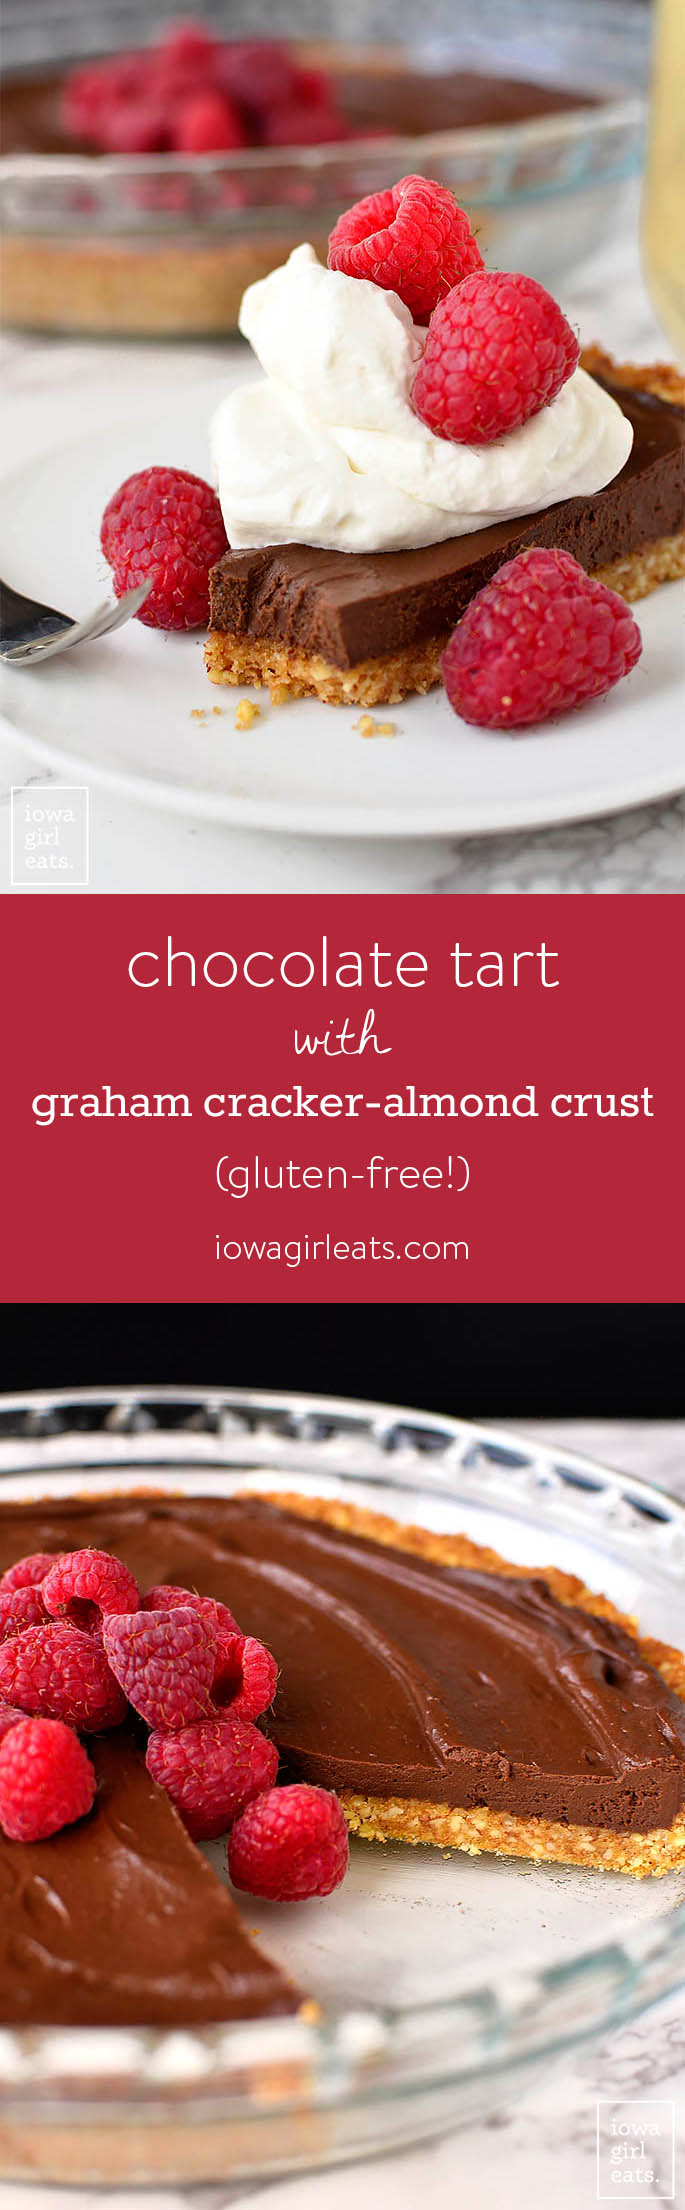 Chocolate Tart with Graham Cracker-Almond Crust is an unbelievably simple yet impressive gluten-free, dairy-free-friendly dessert recipe. Perfect for entertaining! | iowagirleats.com